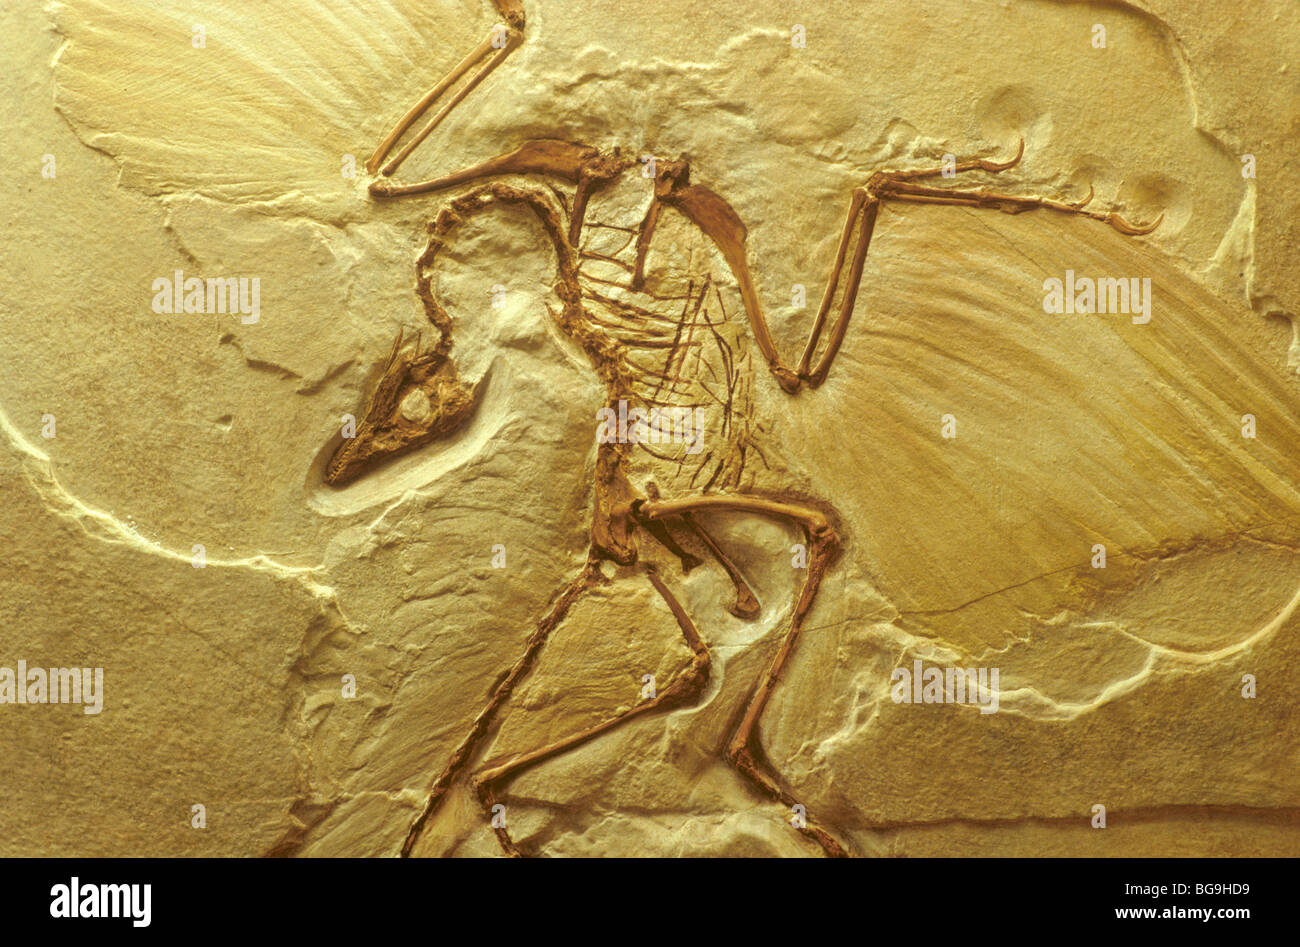 Archaeopteryx, cast of fossil bird, 145 Million years old, Late Jurassic Period, Germany Stock Photo